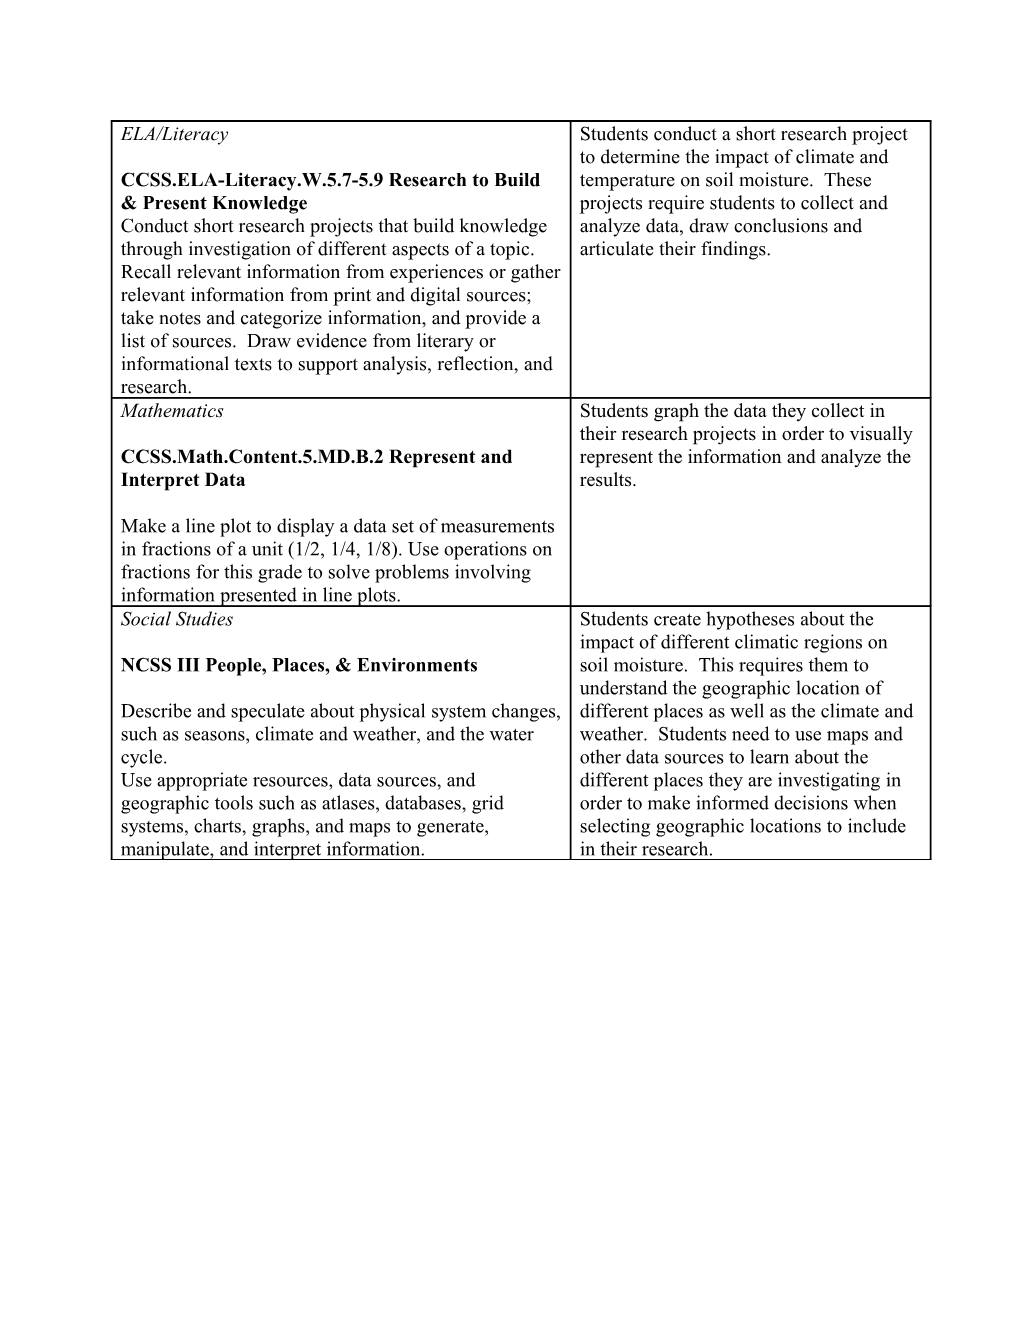 Connections to the Common Core State Standards (NGAC and CCSSO 2010) and International